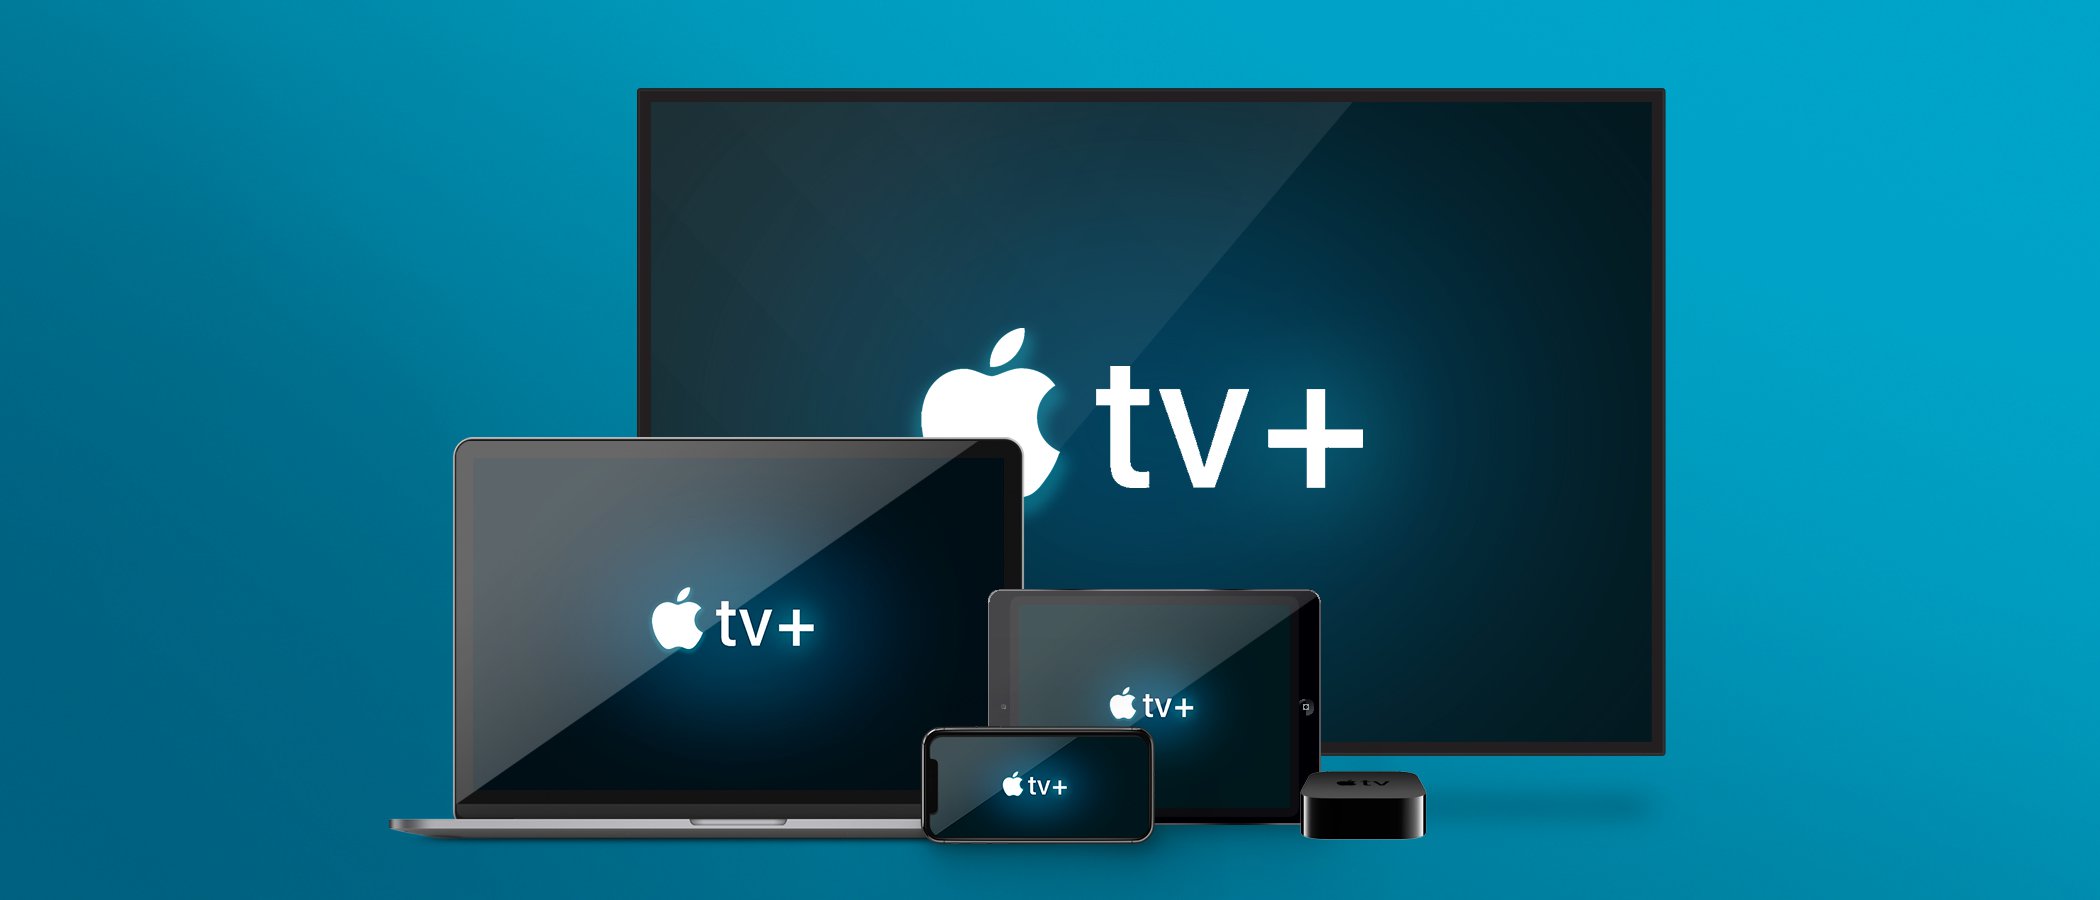 Apple TV+ Offers Free Access To Some Original Shows & A Movie For